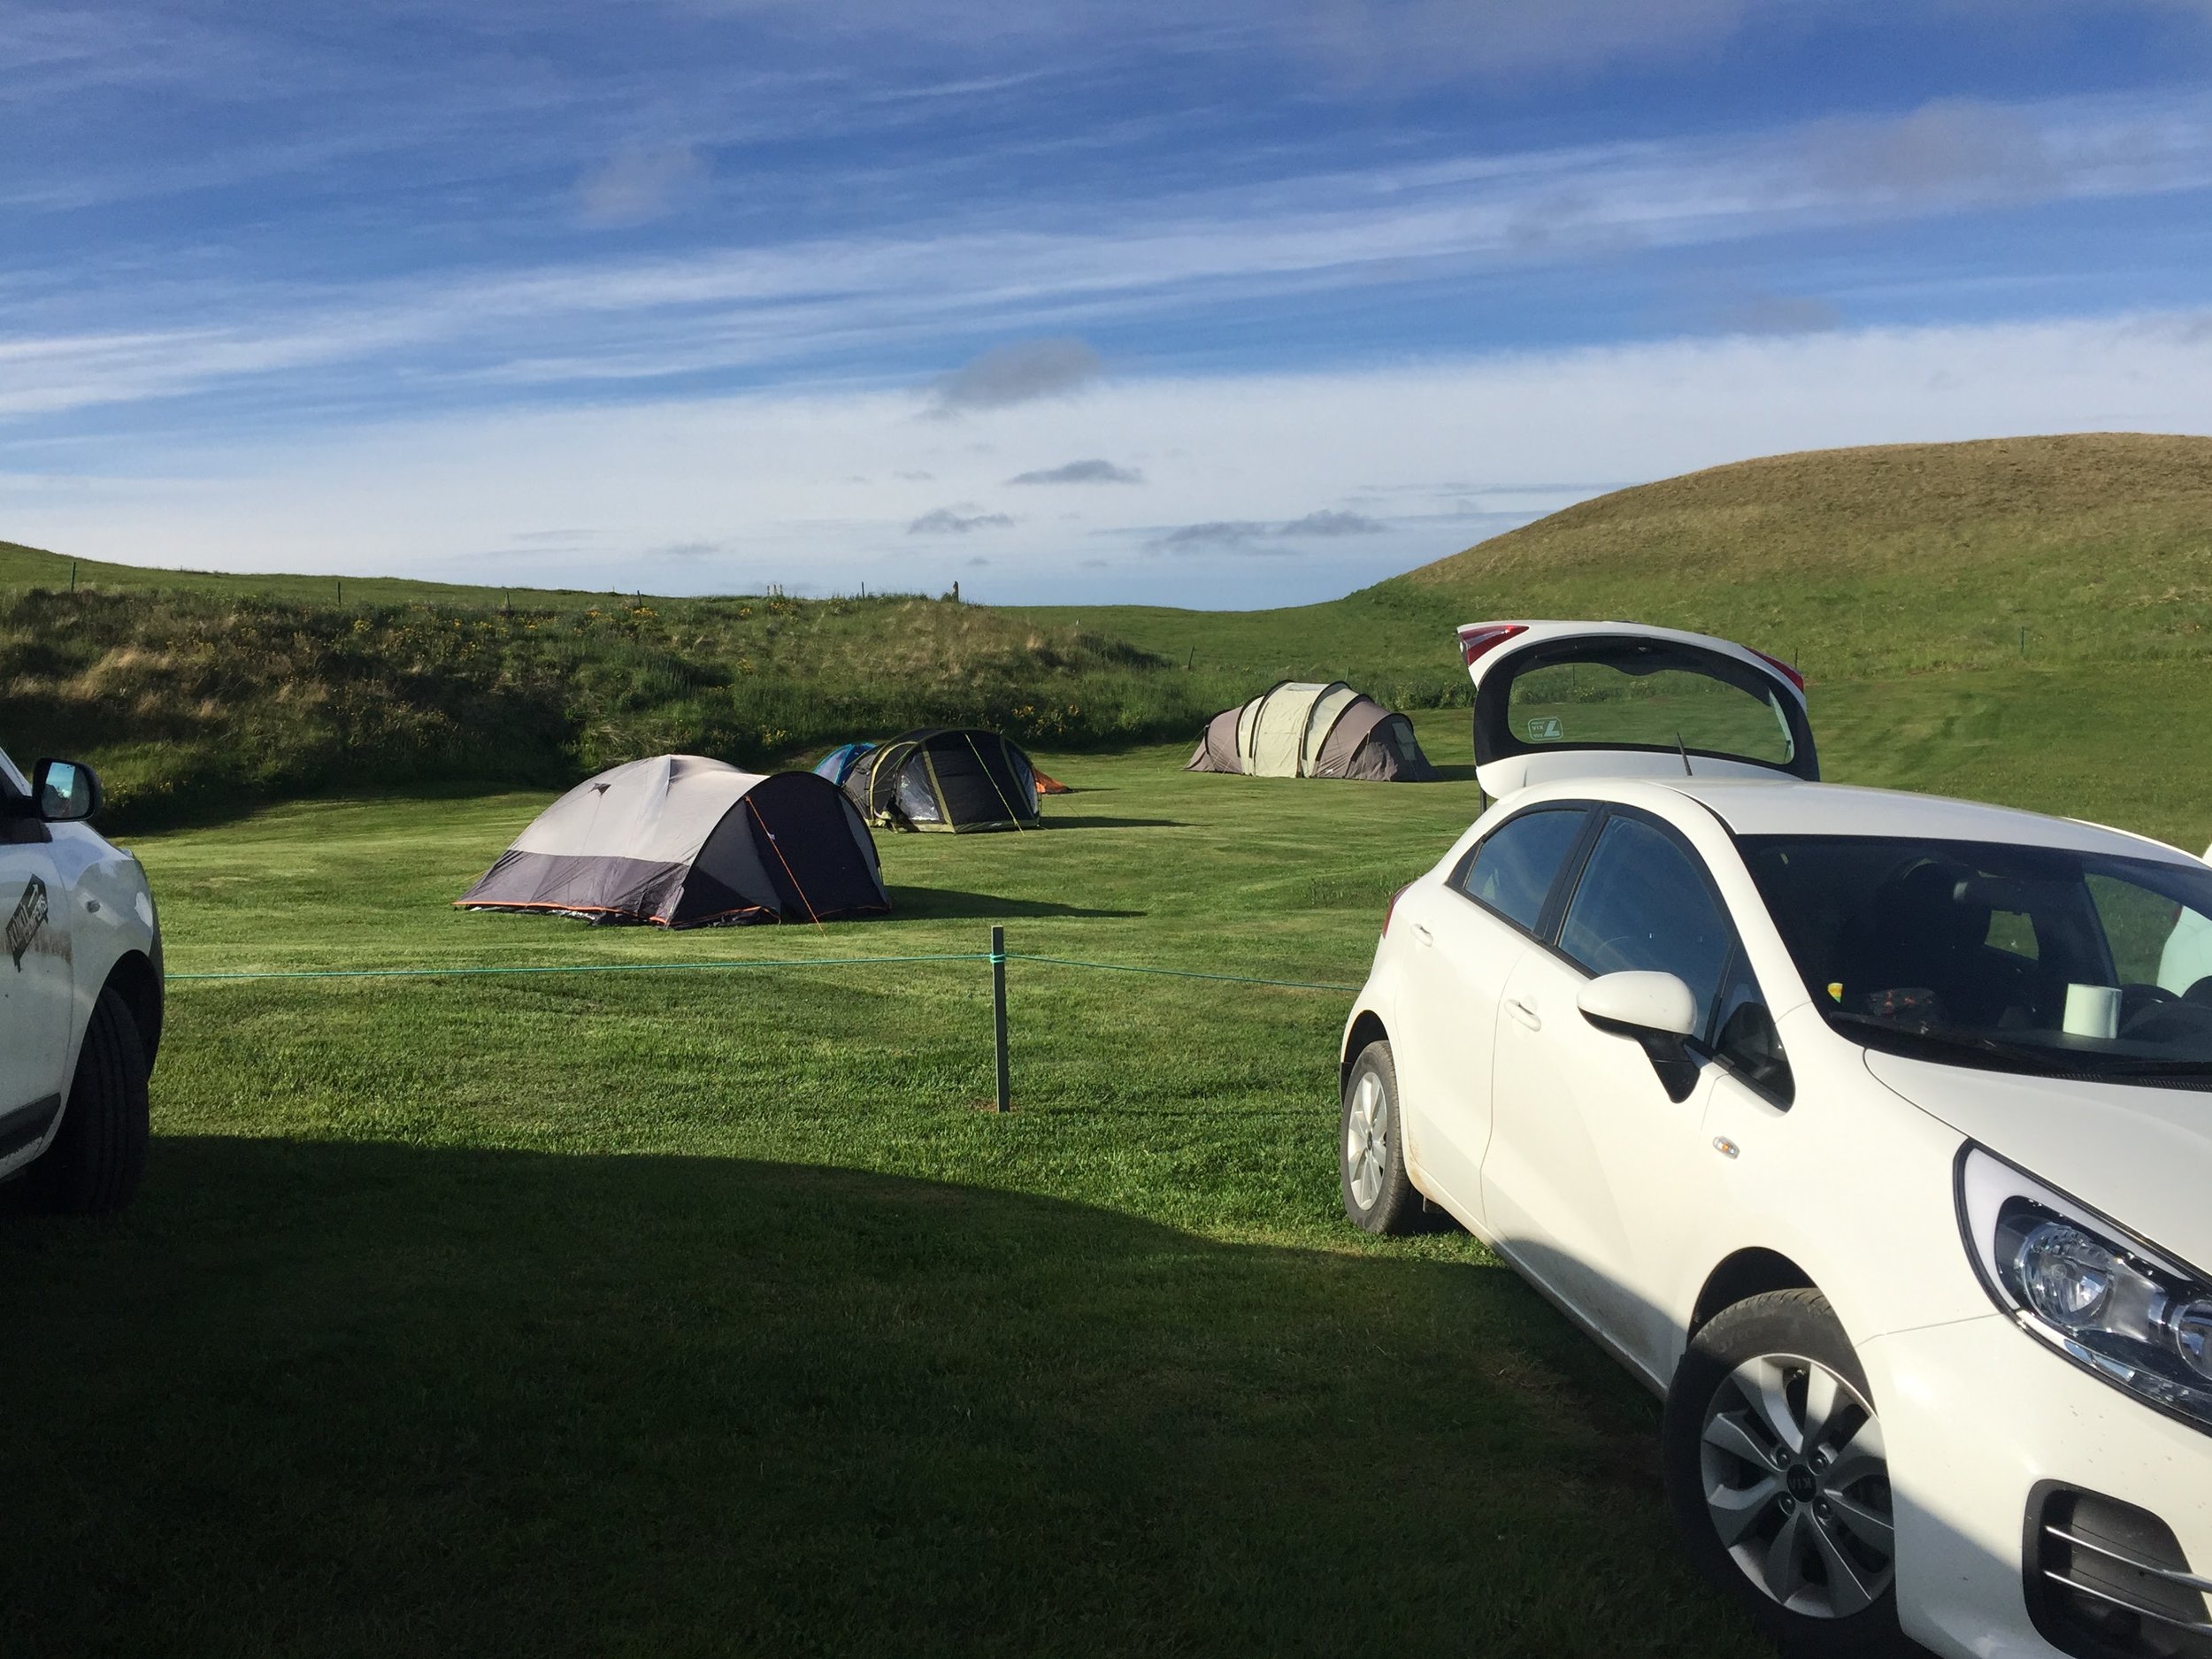 Bjarg Campsite, or Camping Myvatn